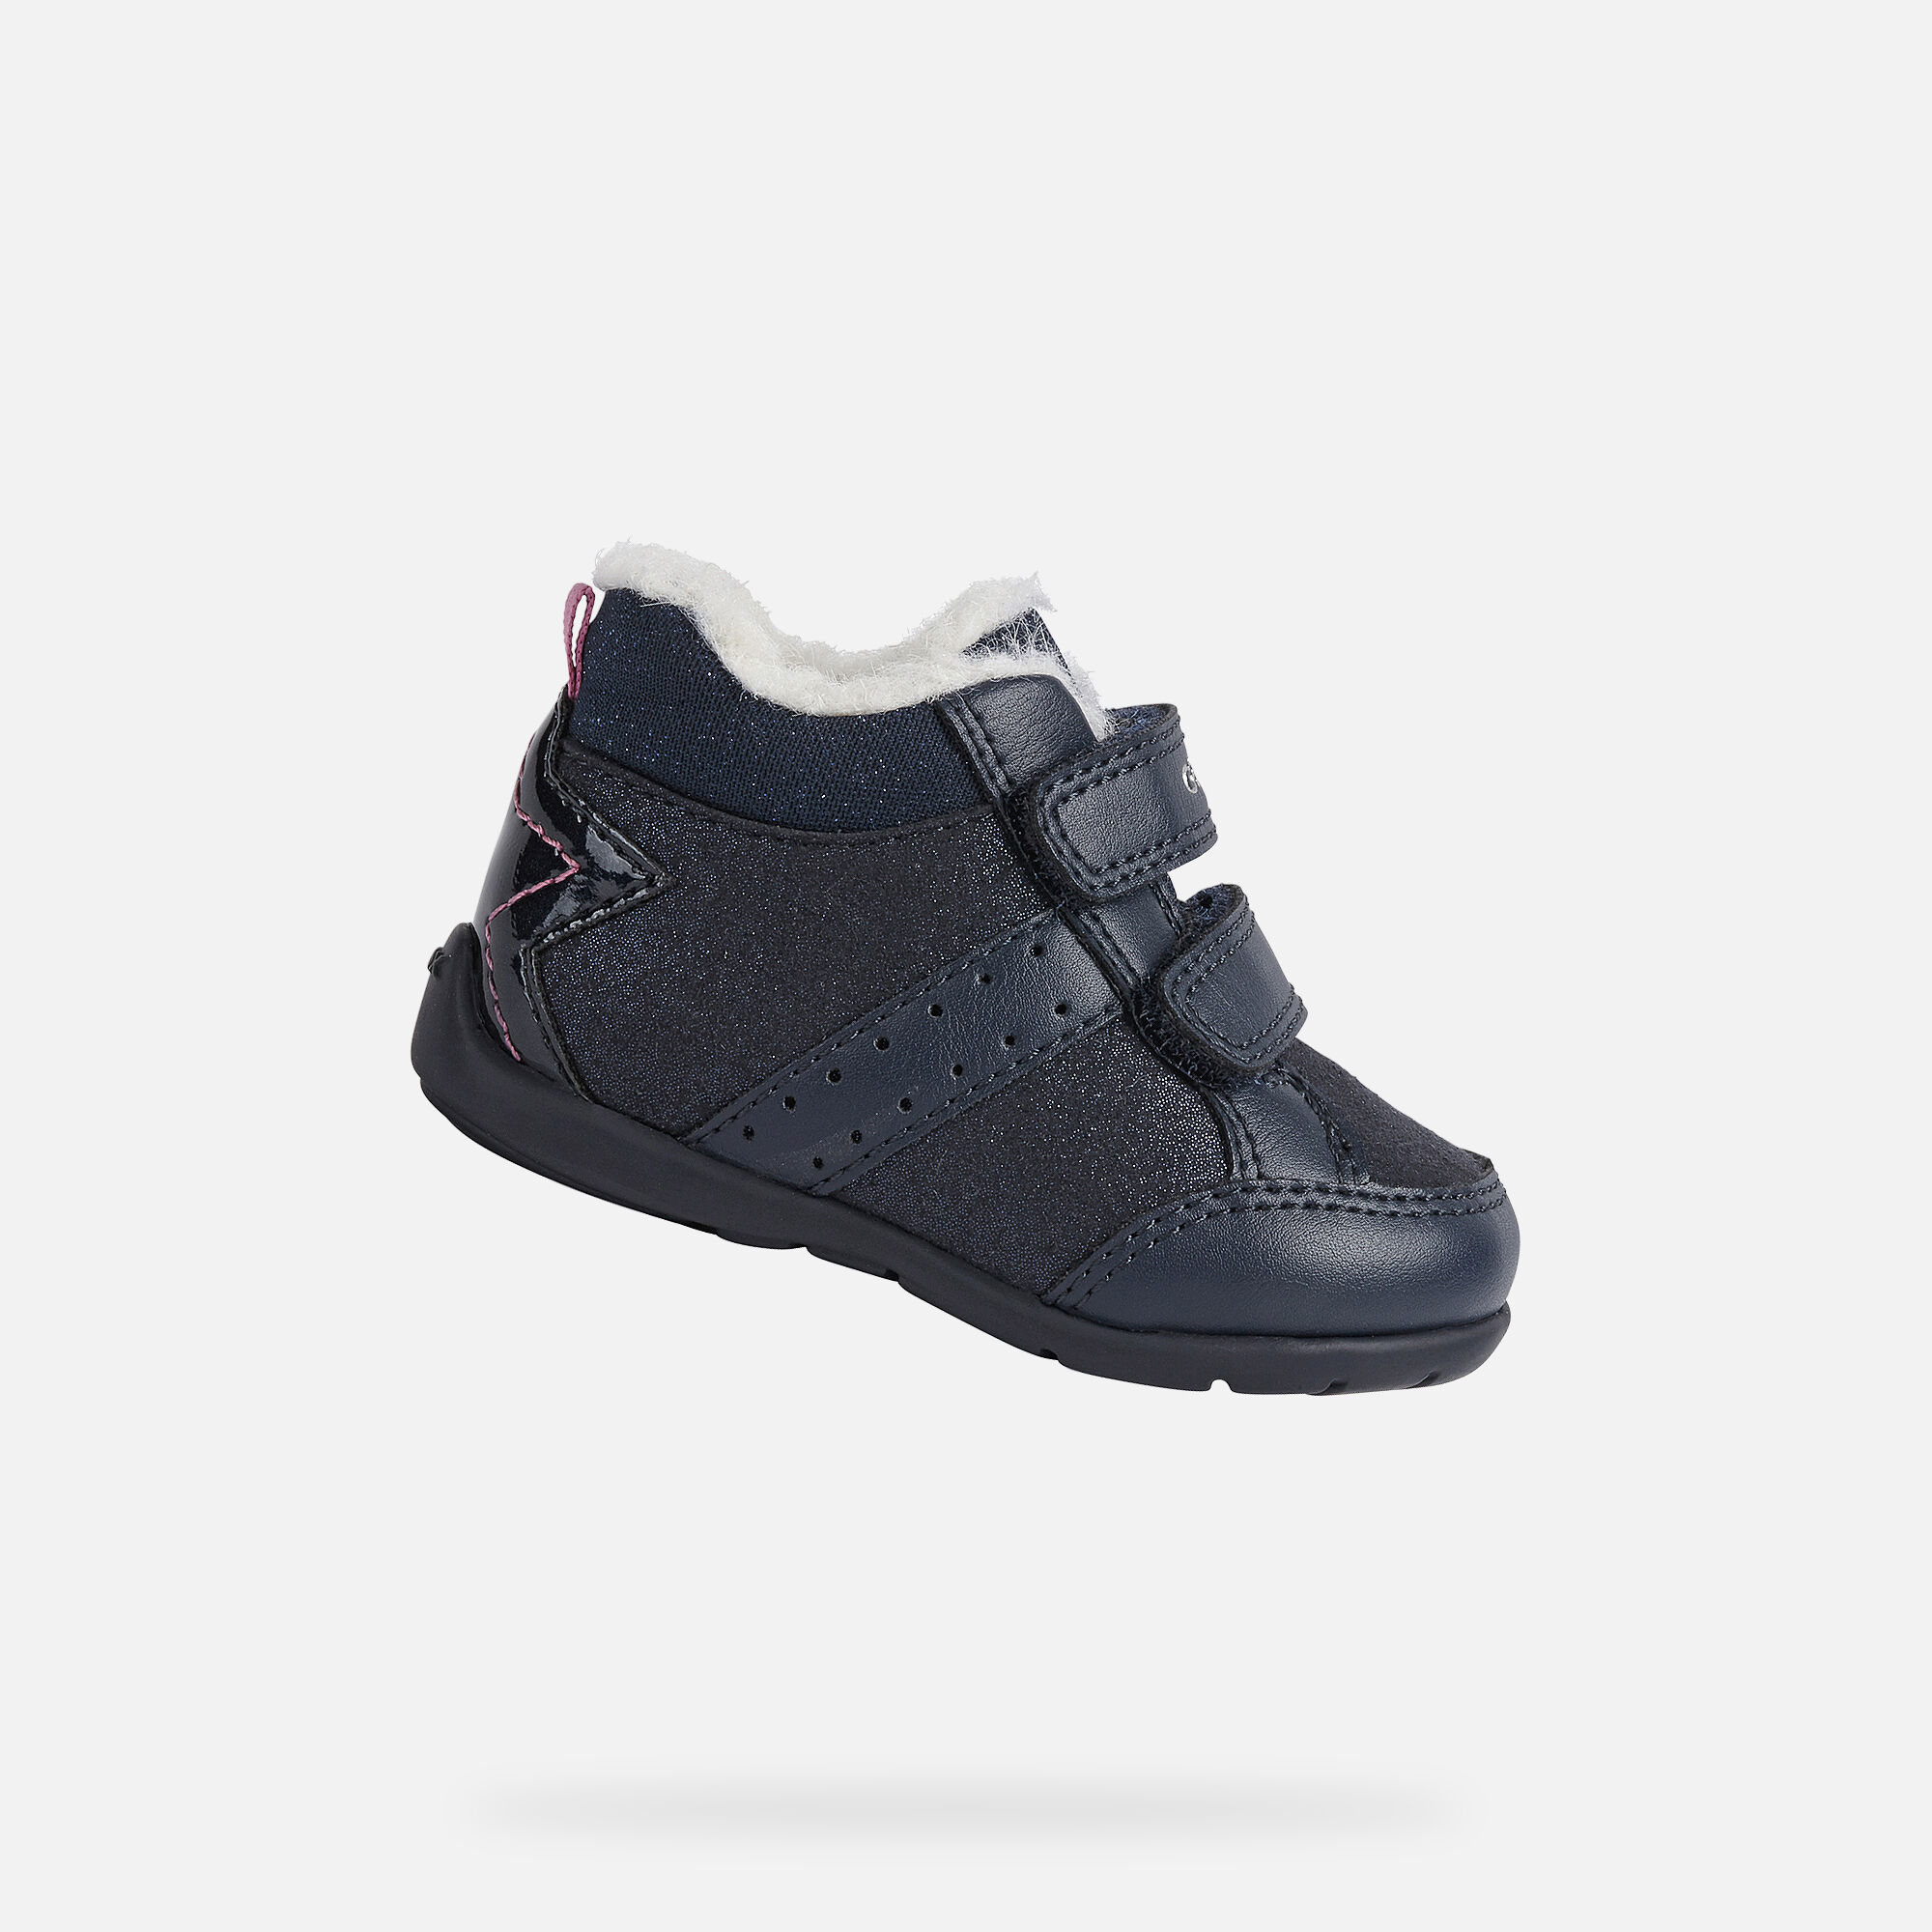 Geox Boys Toddler ELTHAN 7 First Steps